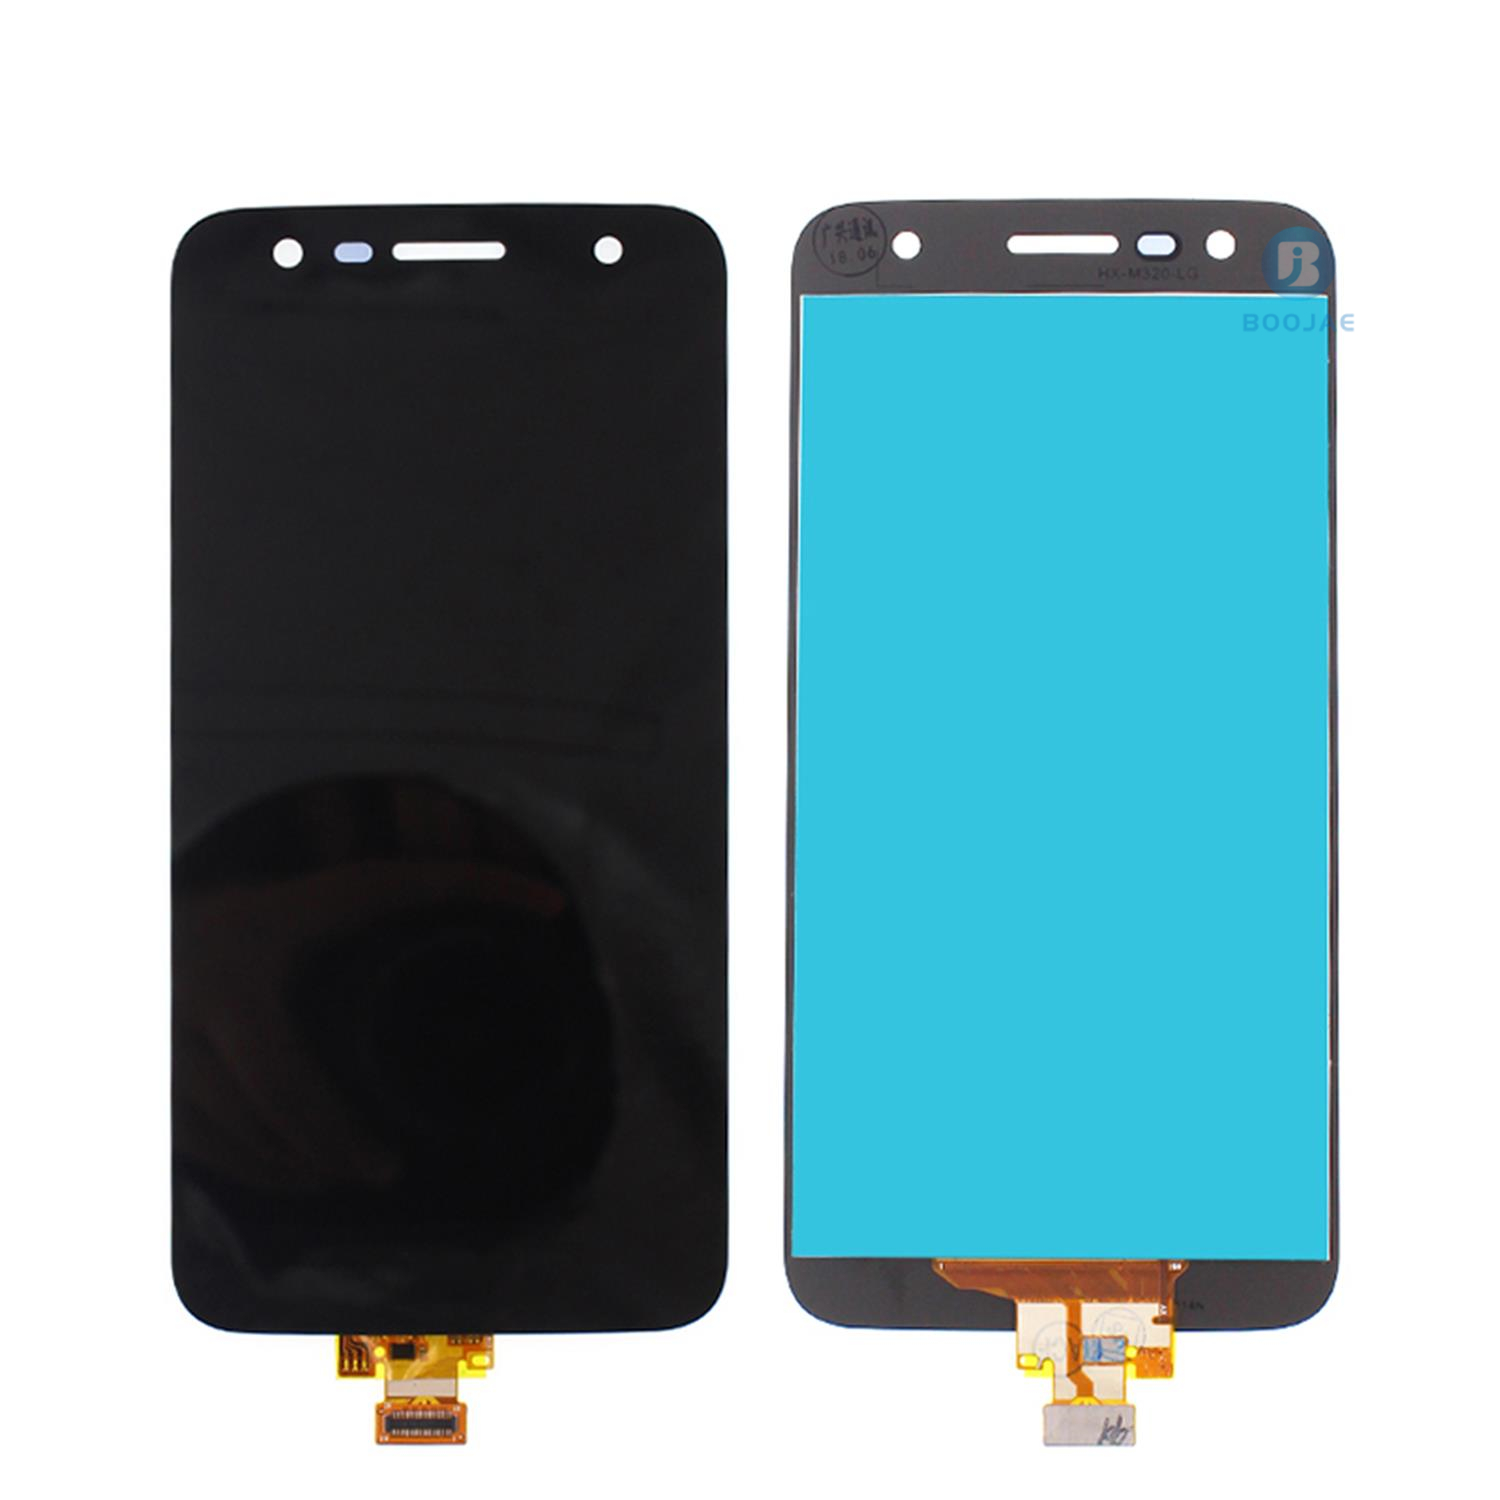 LG X Power 2 LCD Screen Display, Lcd Assembly Replacement